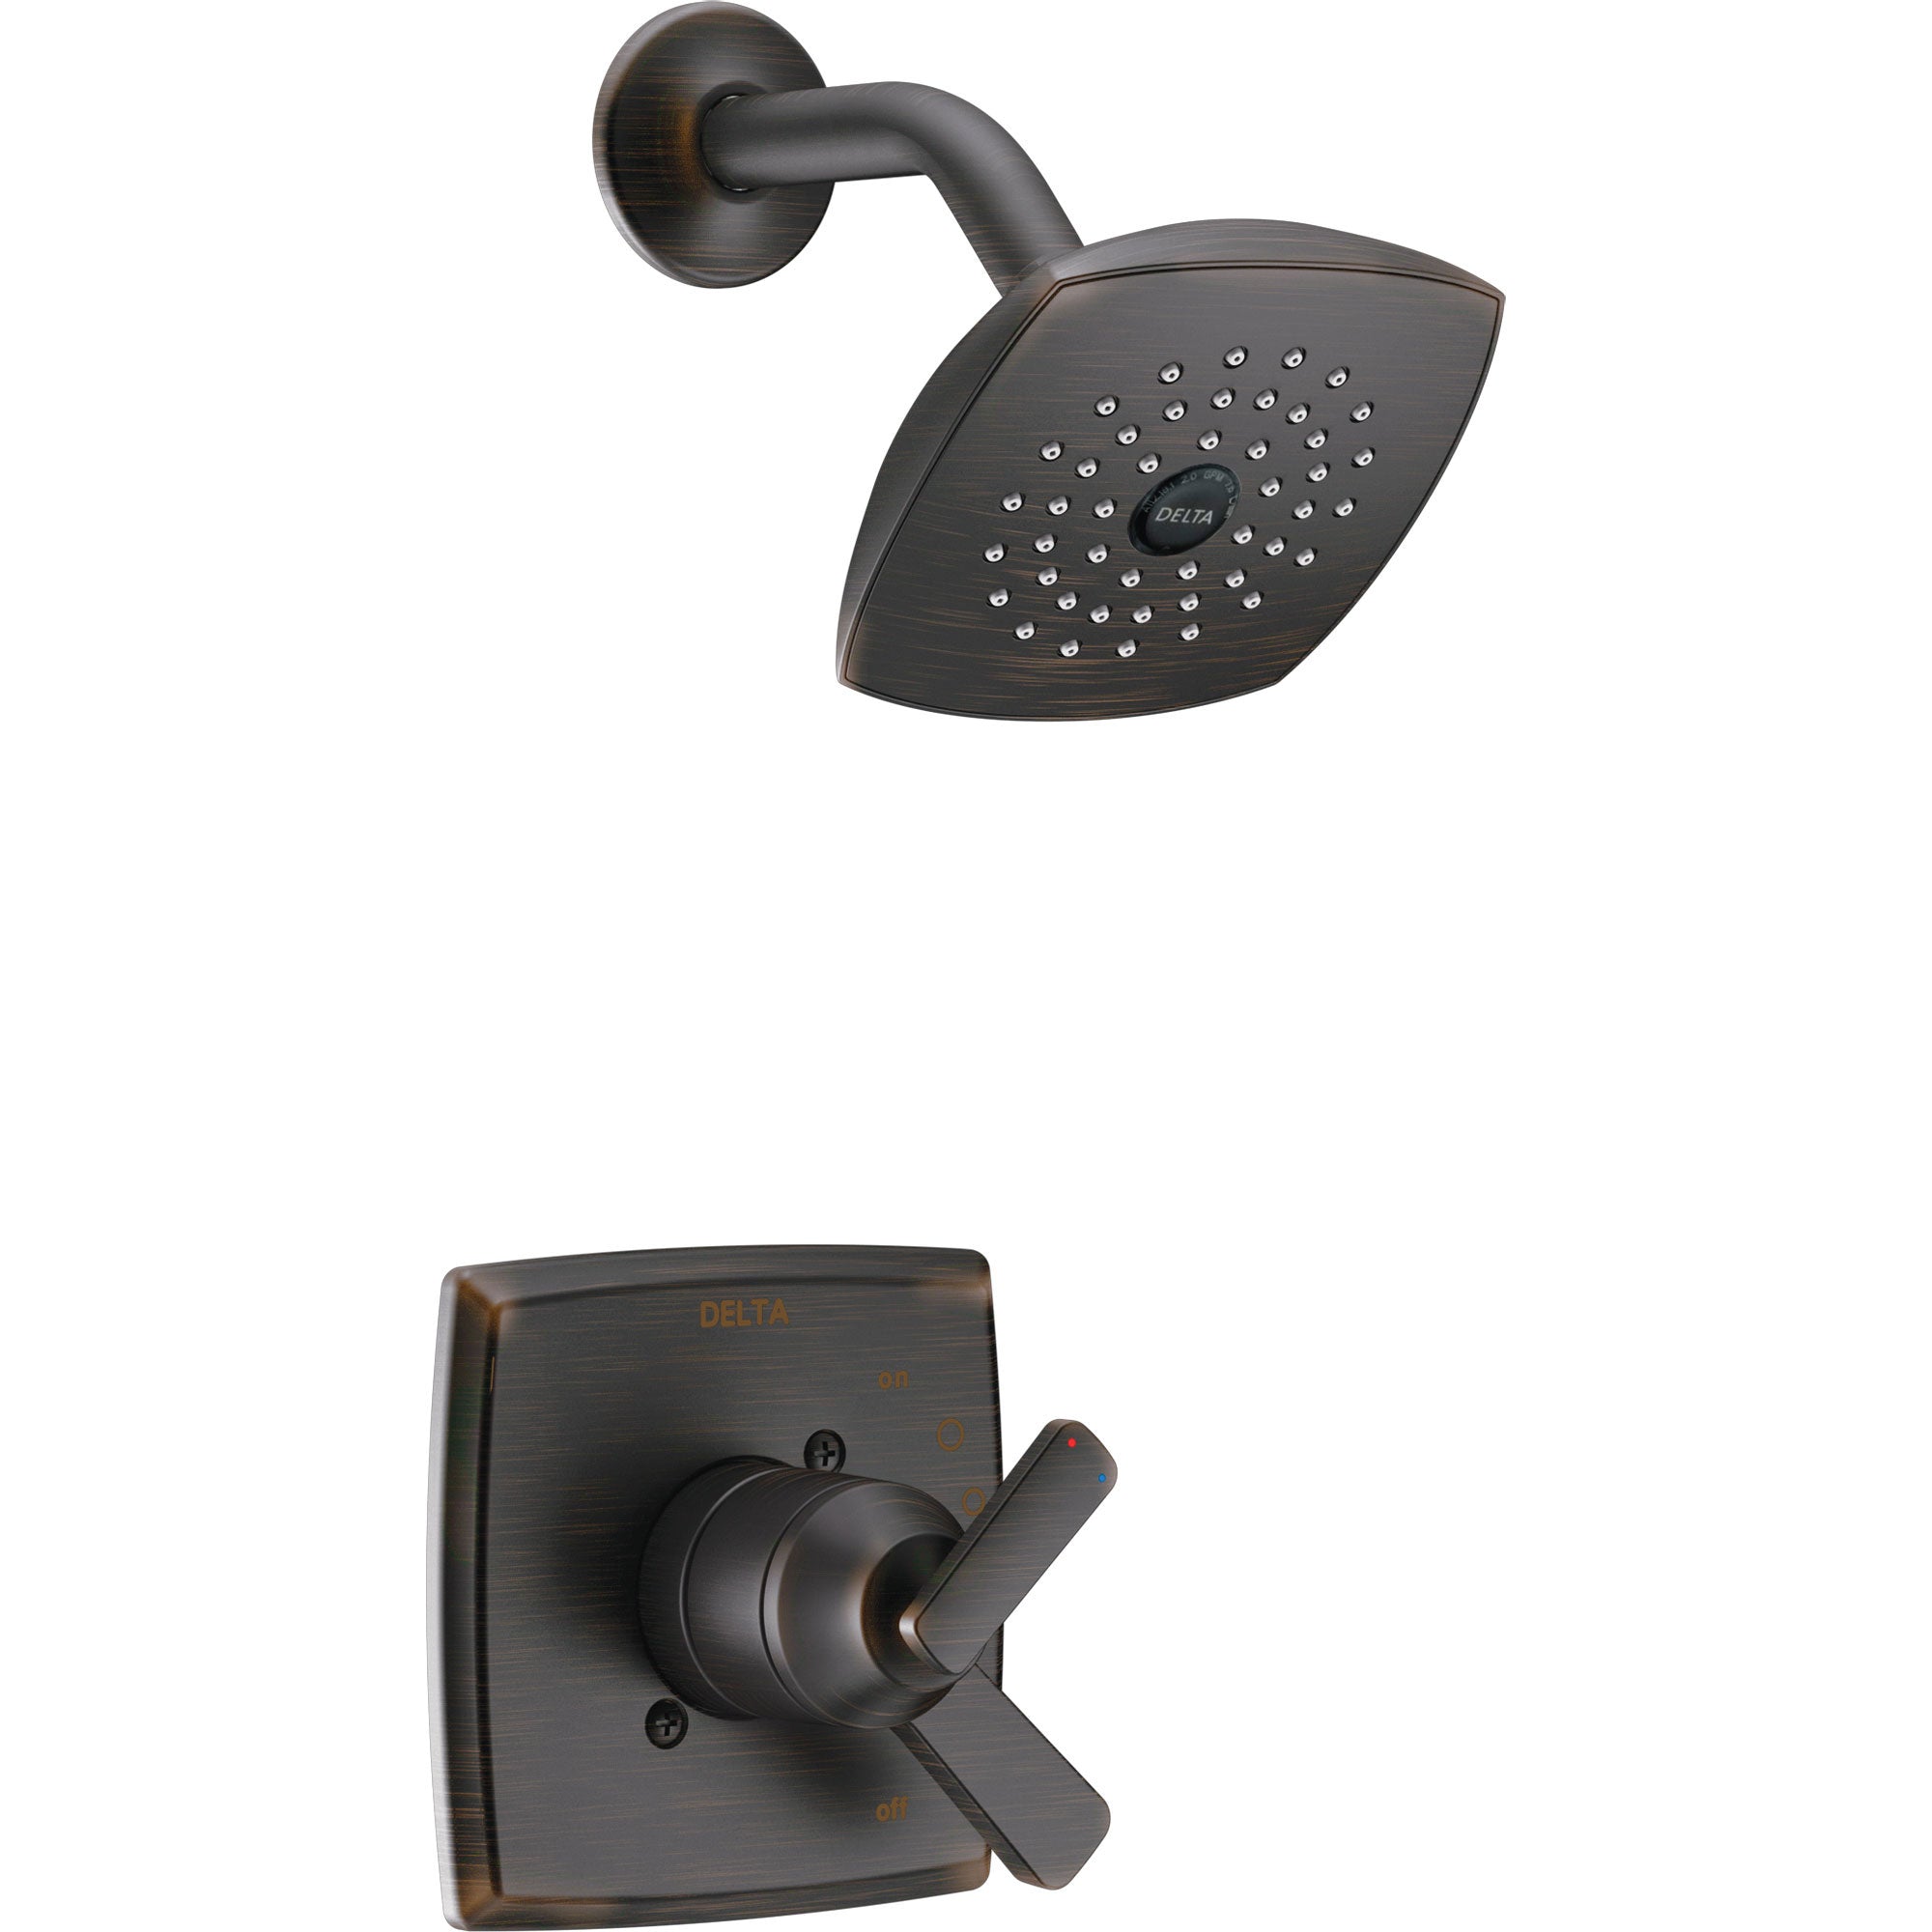 Delta Ashlyn Venetian Bronze Monitor 17 Series Shower Only Faucet with Dual Temperature and Pressure Control INCLUDES Rough-in Valve with Stops D1139V